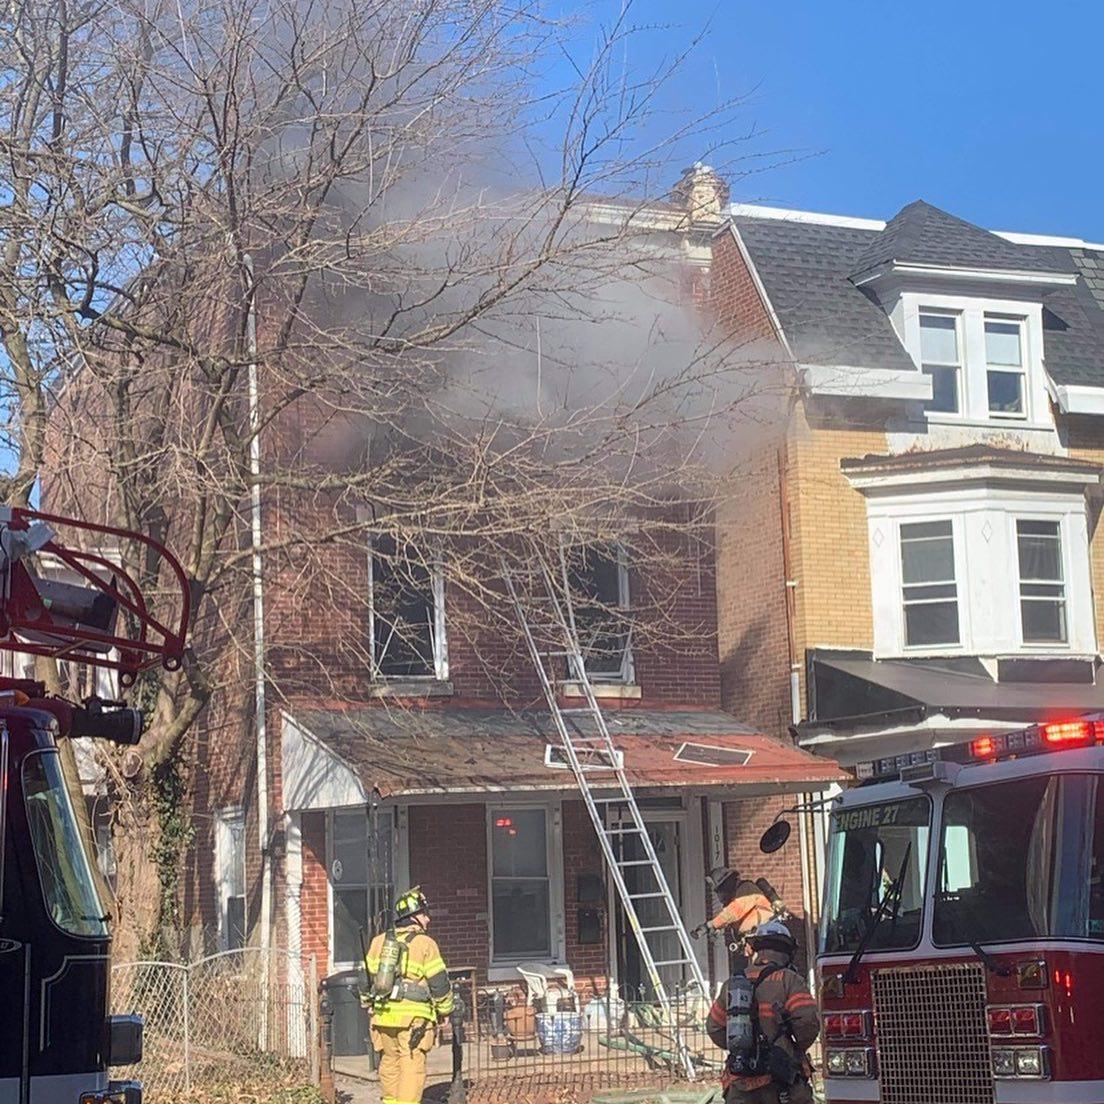 Johnson had just returned from a trip to the bank at around 10 a.m. on the morning of March 15 when he noticed fire coming from a neighbor's house. (Courtesy of Chris Camarda/<a href="https://www.facebook.com/NorristownFireDepartment/">Norristown Fire Department</a>)